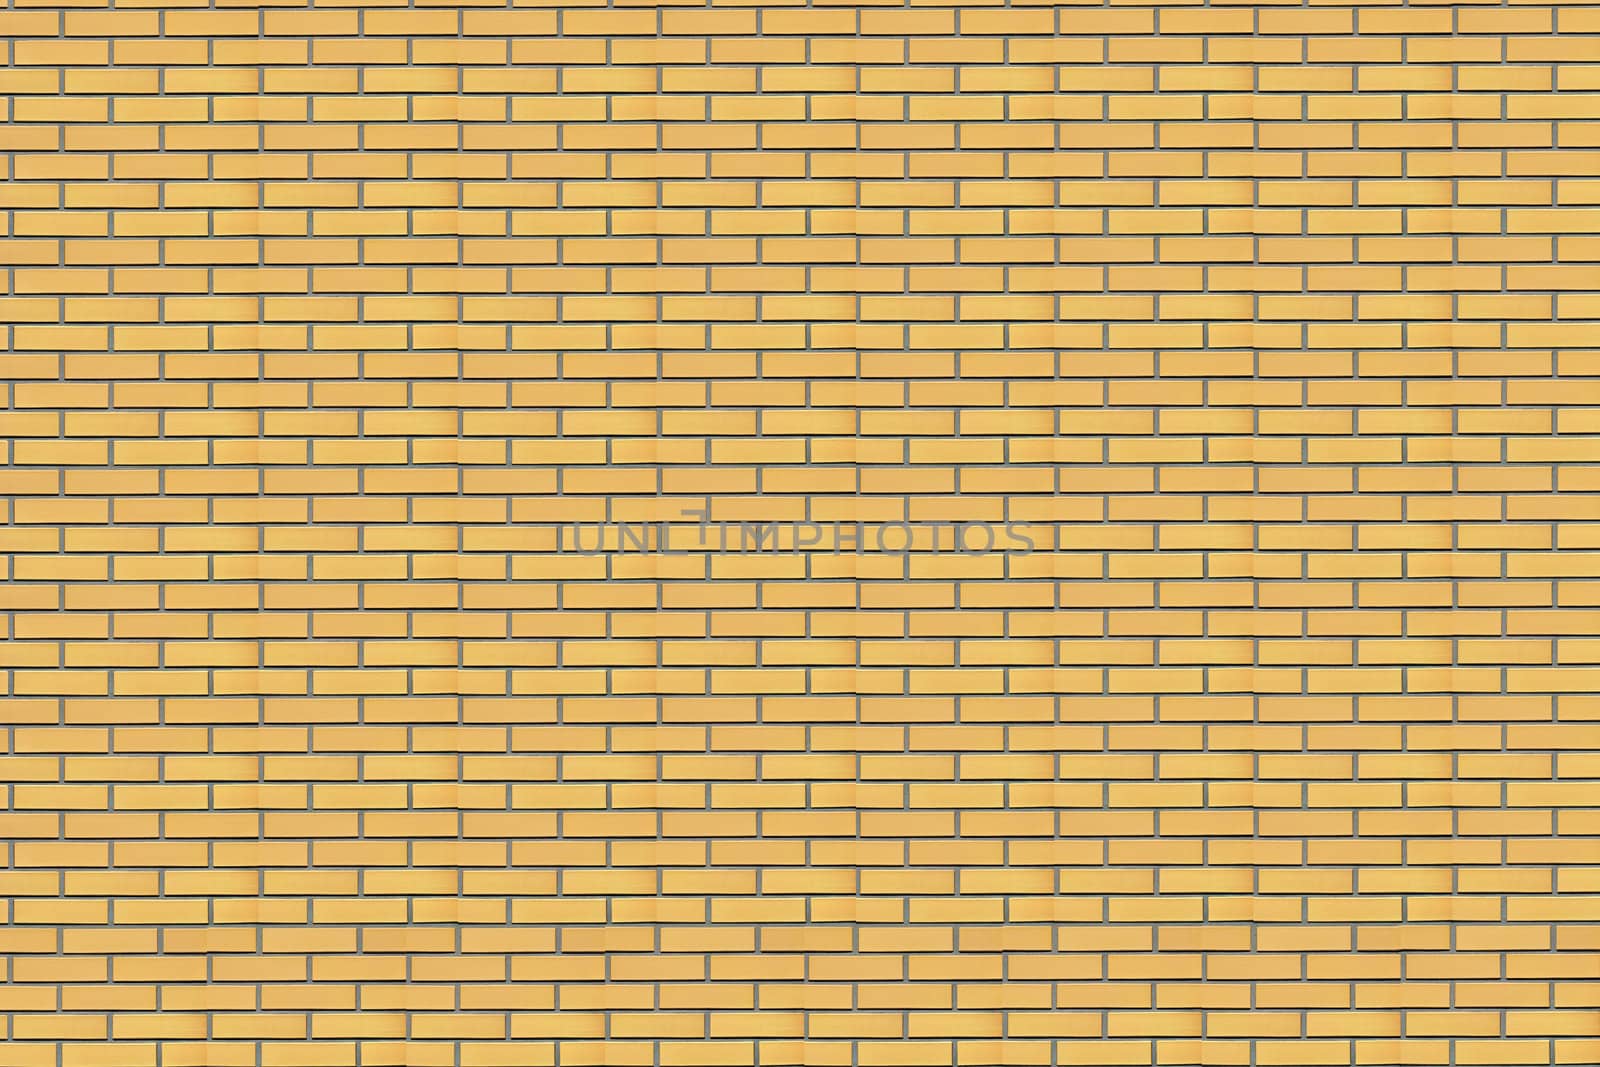 Wall of a house from a yellow brick. A background